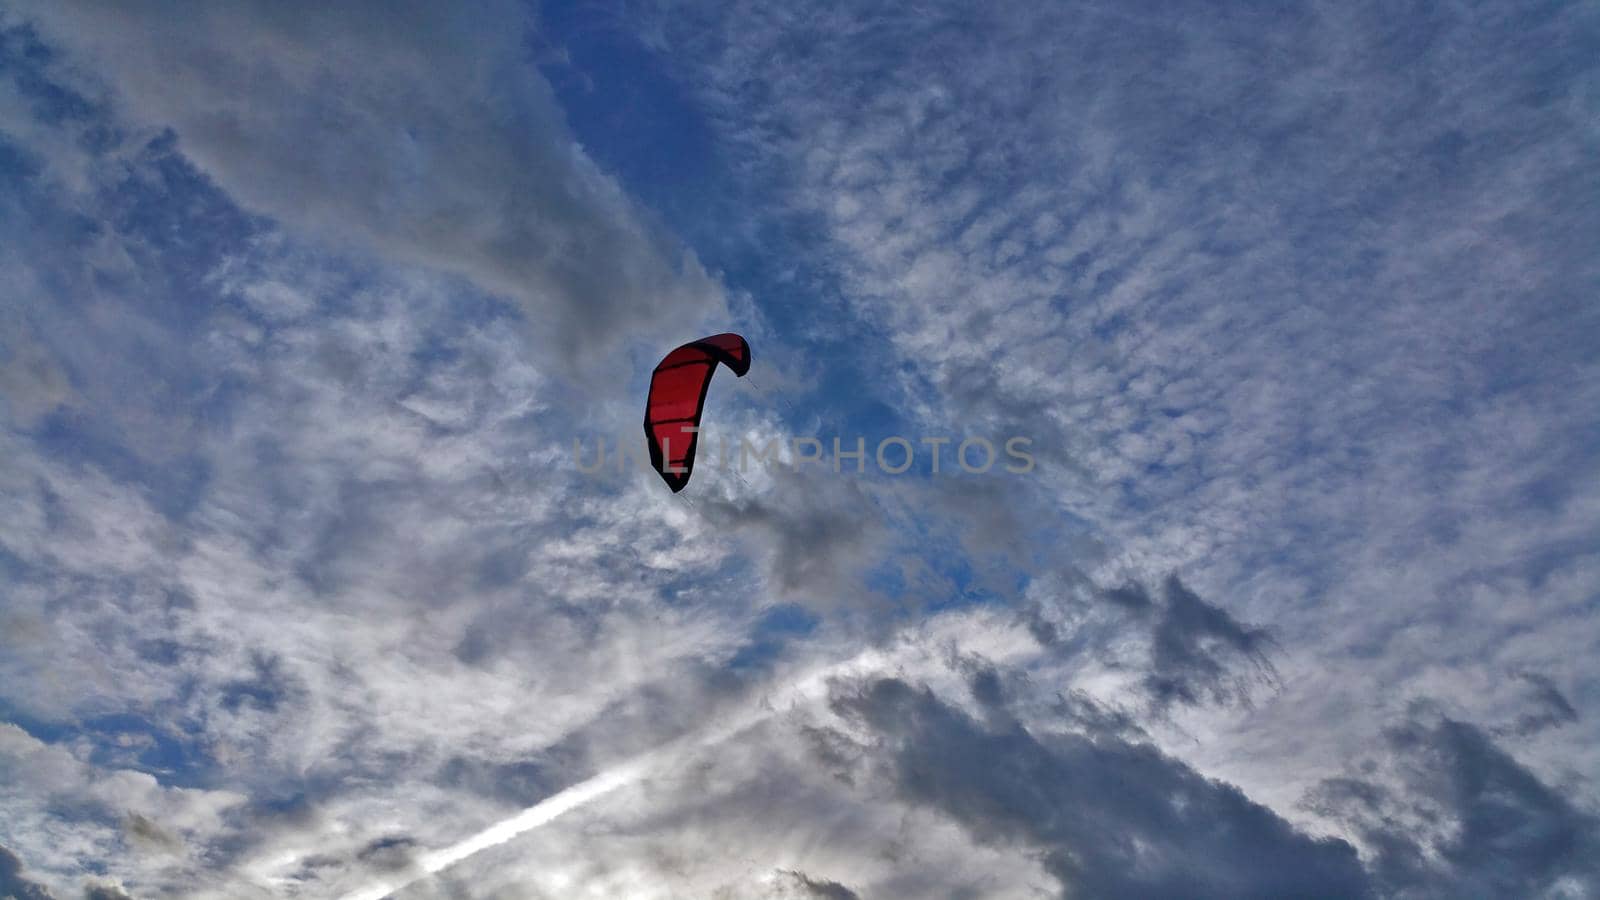 Red paraglider on the cloudy sky background by zakob337